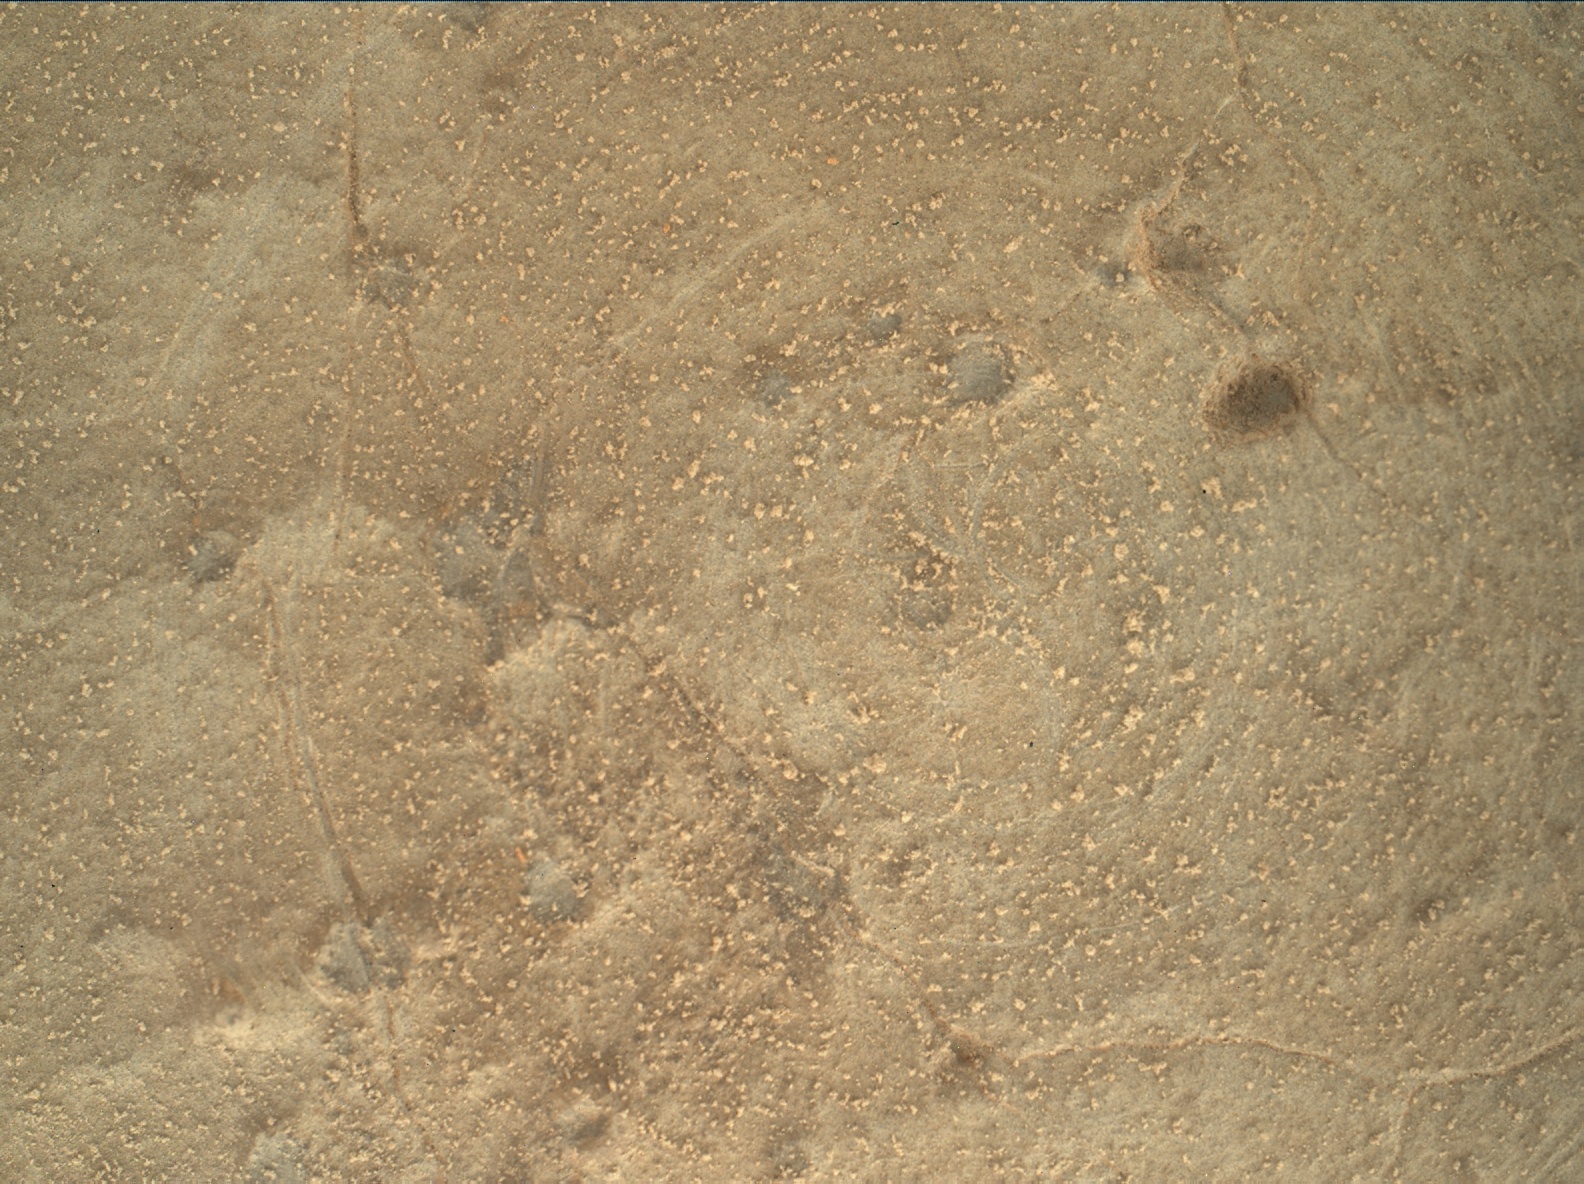 Nasa's Mars rover Curiosity acquired this image using its Mars Hand Lens Imager (MAHLI) on Sol 150